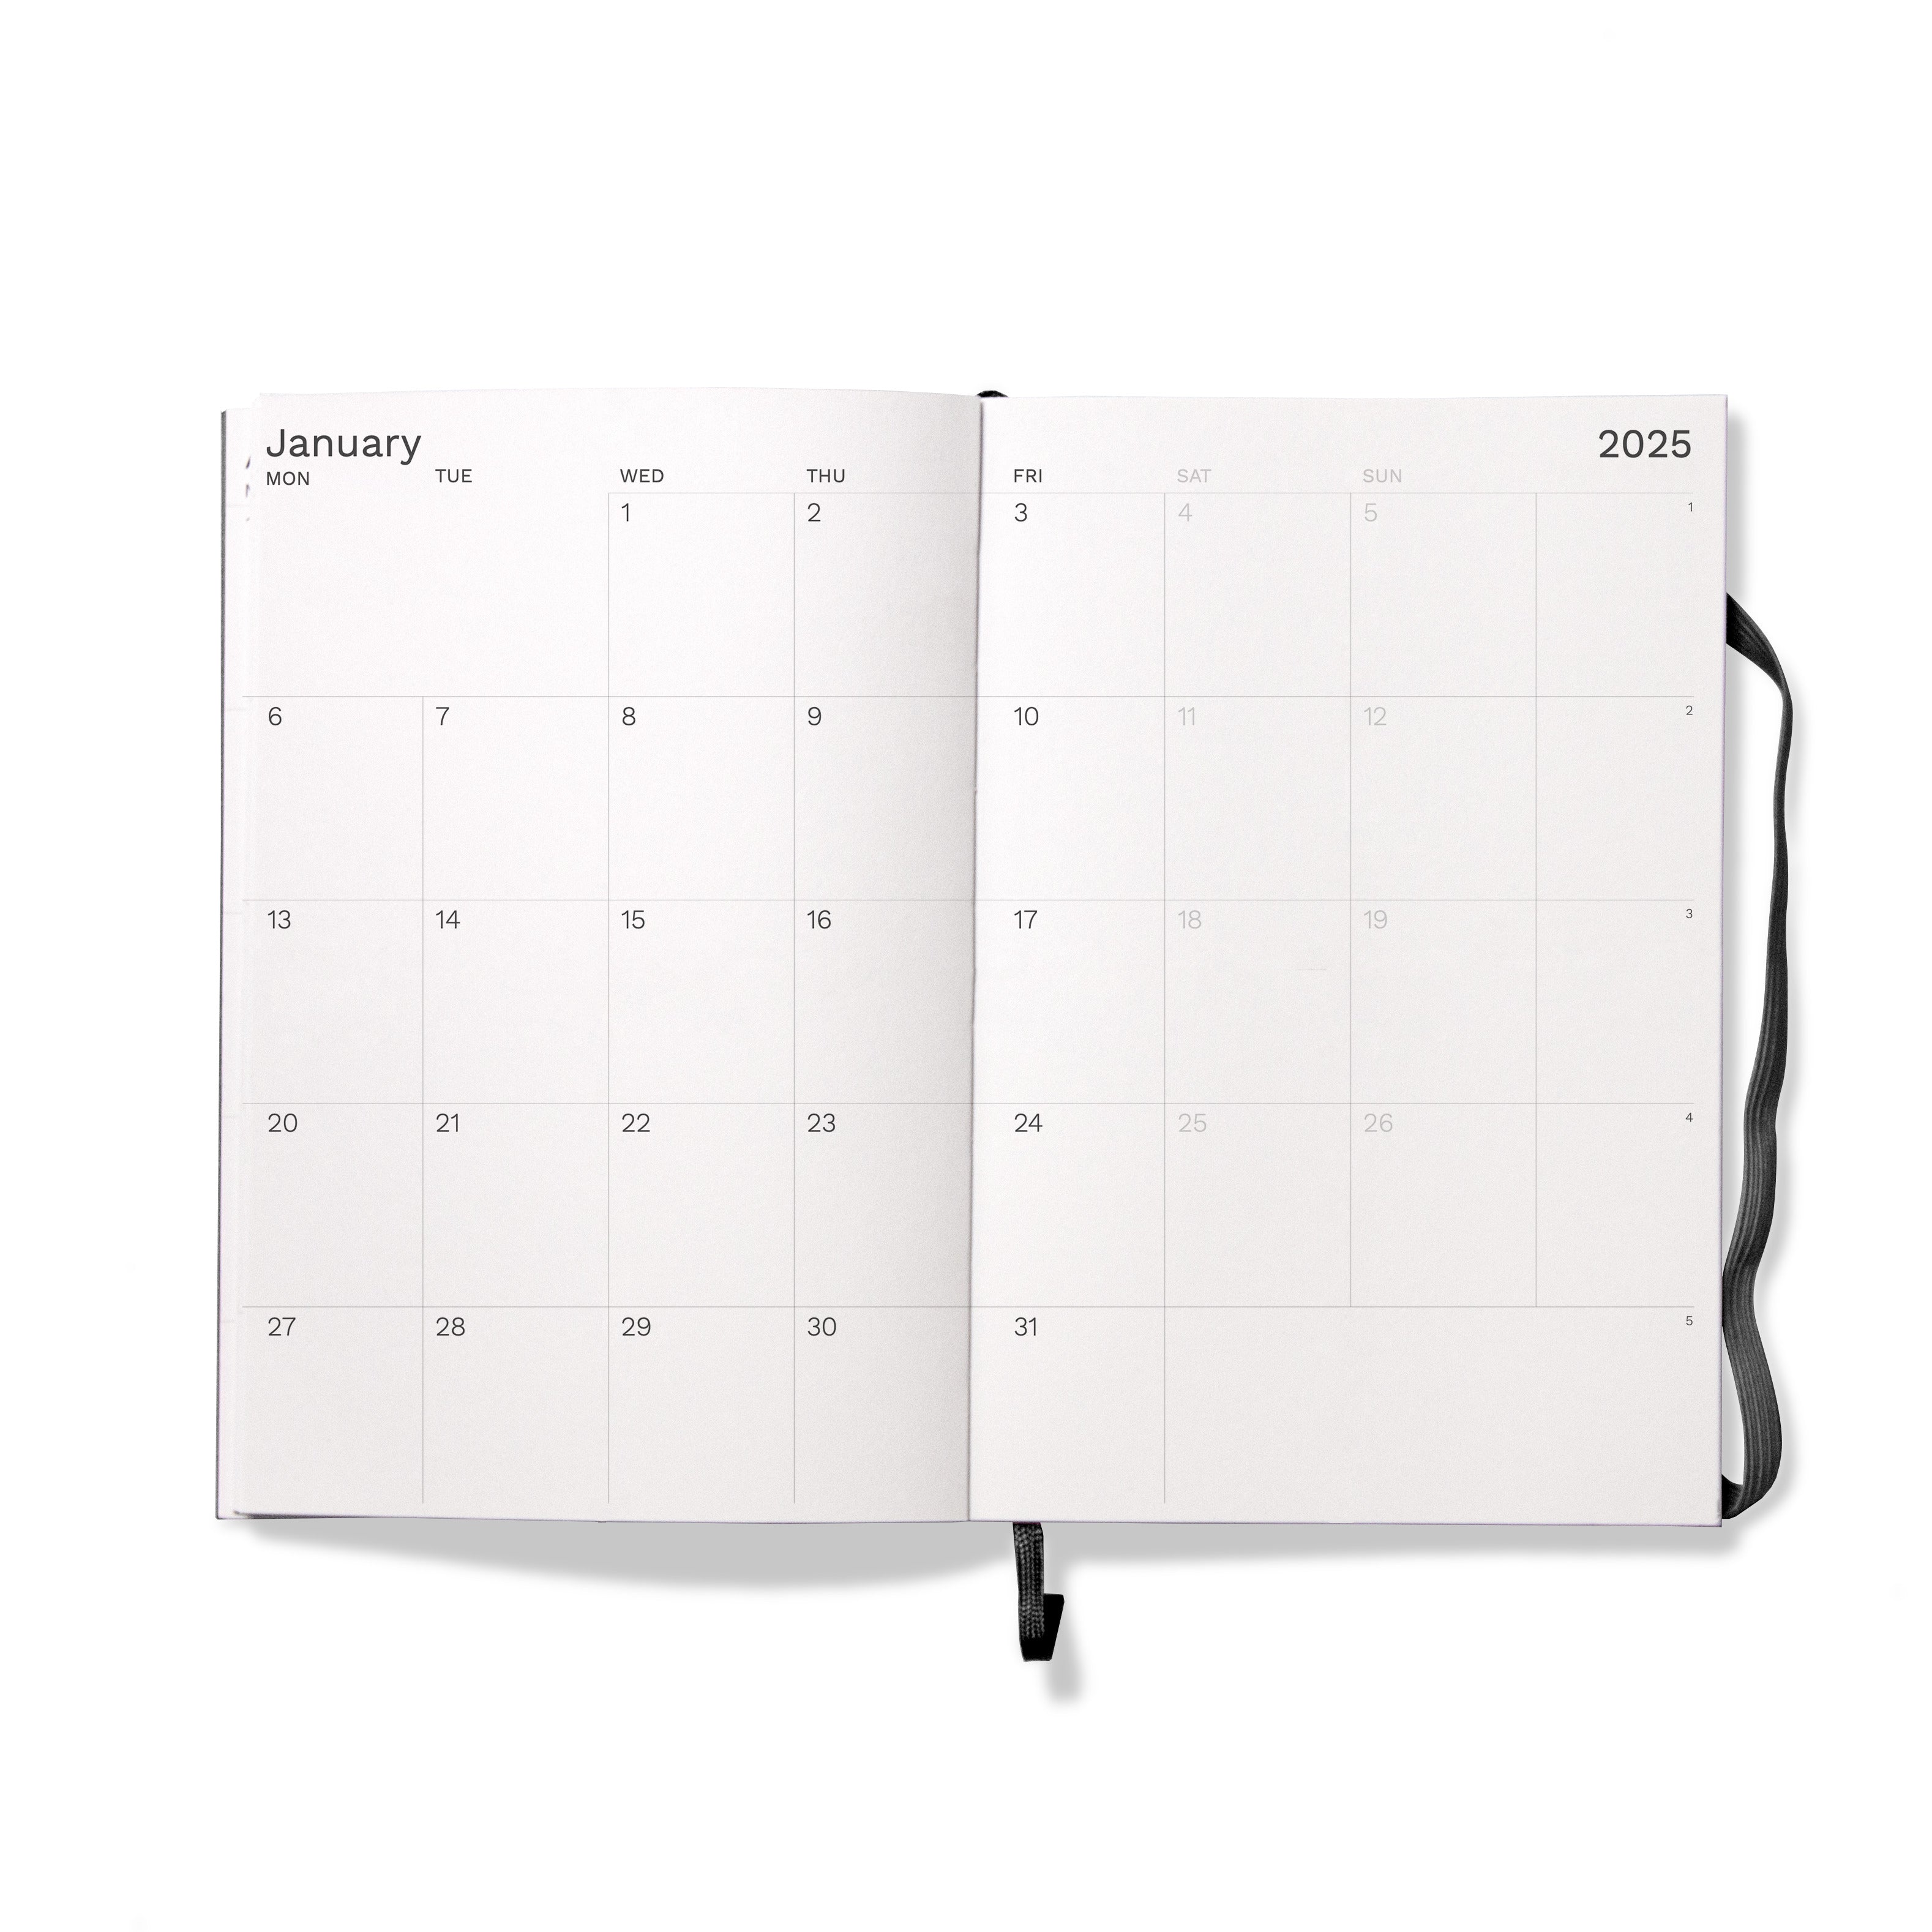 Octàgon Design 2025 Weekly Planner similar A5 size Black, front cover, monthly template